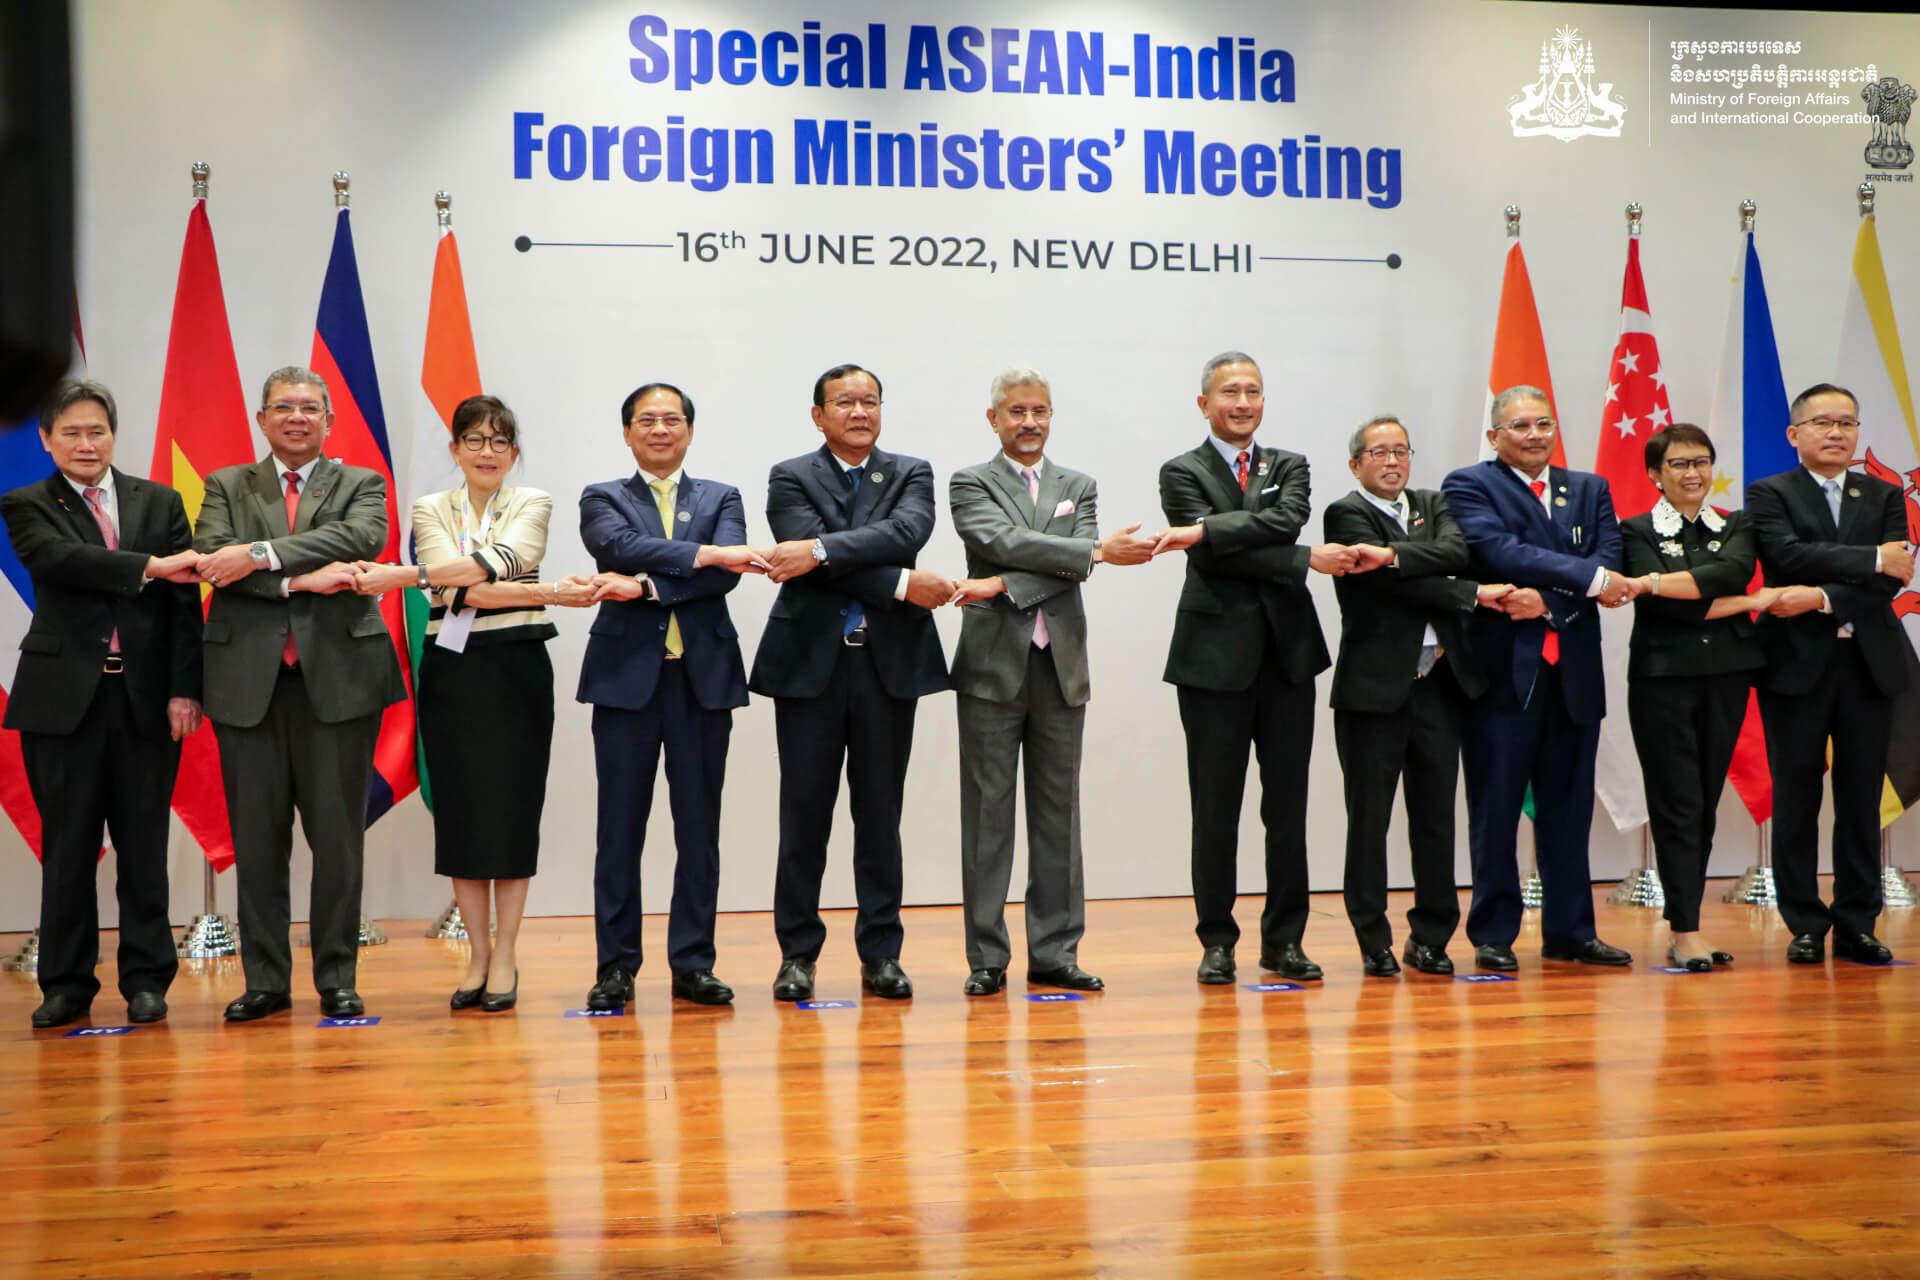 Myanmar Excluded From ASEAN-India Meet Over Continued Failure to Meet Five-Point Consensus